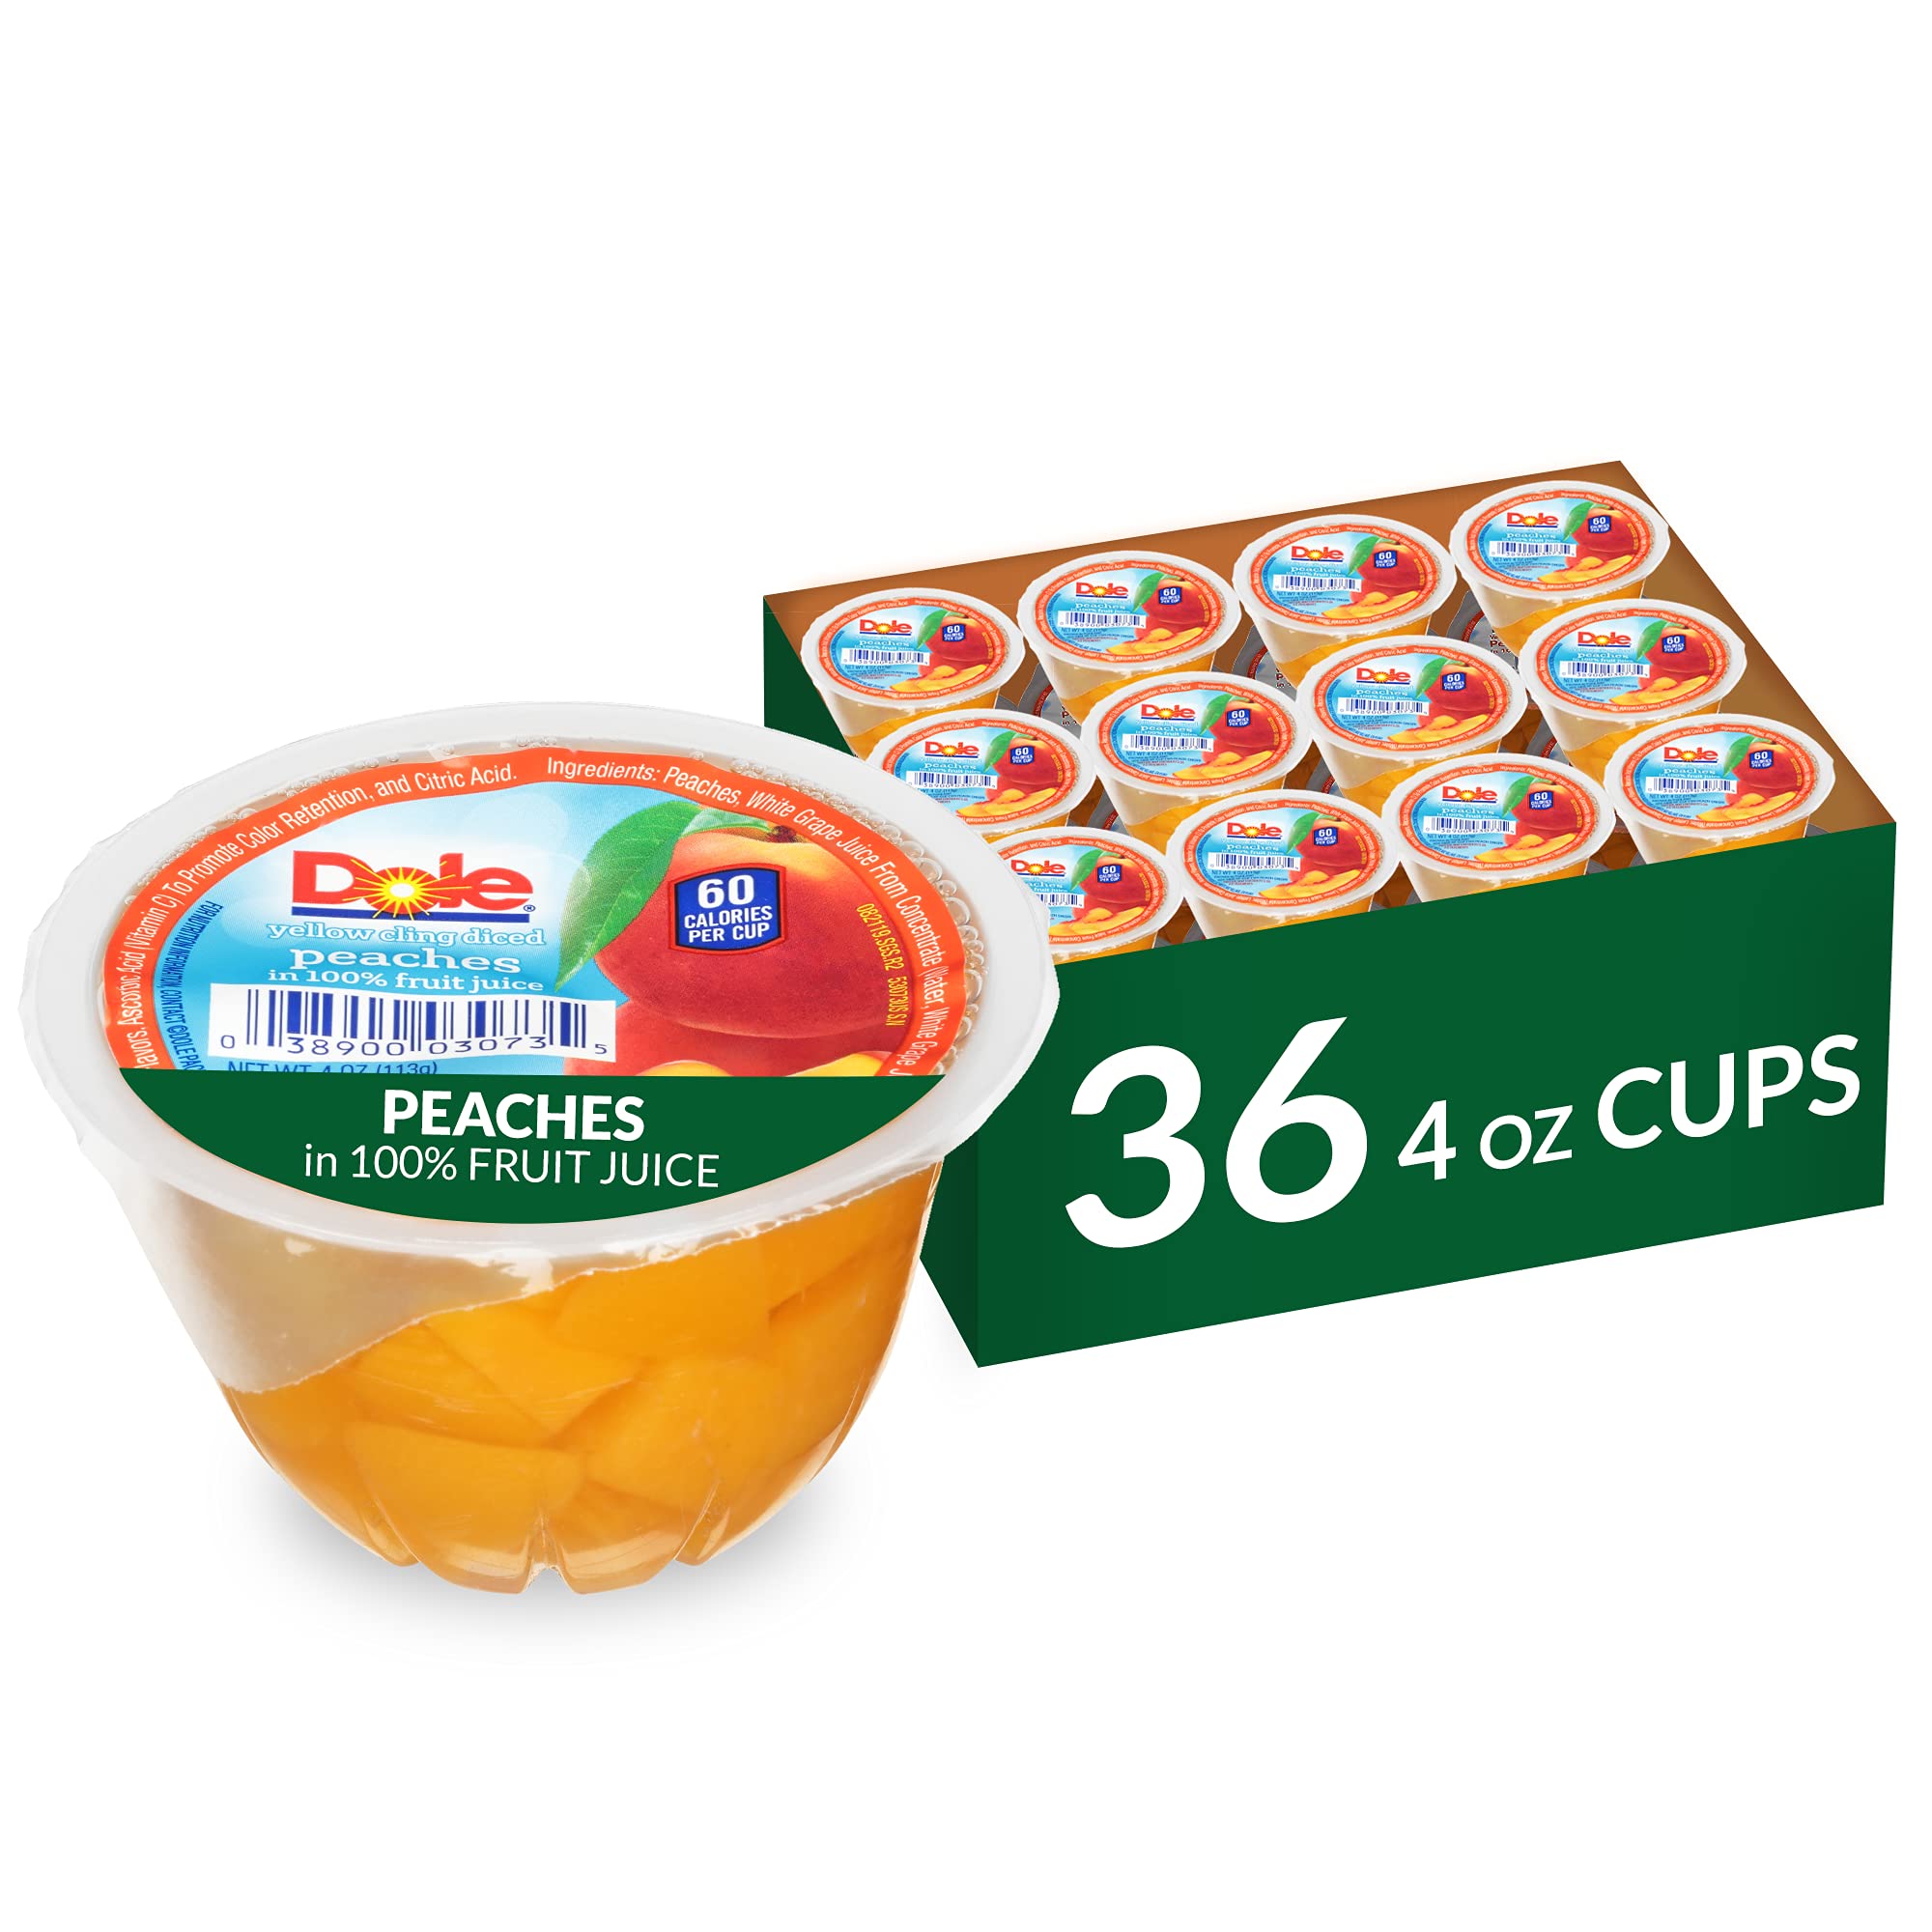 Book Cover Dole Fruit Bowls Diced Peaches in 100% Juice, Gluten Free Healthy Snack, 4 Oz, 36 Total Cups